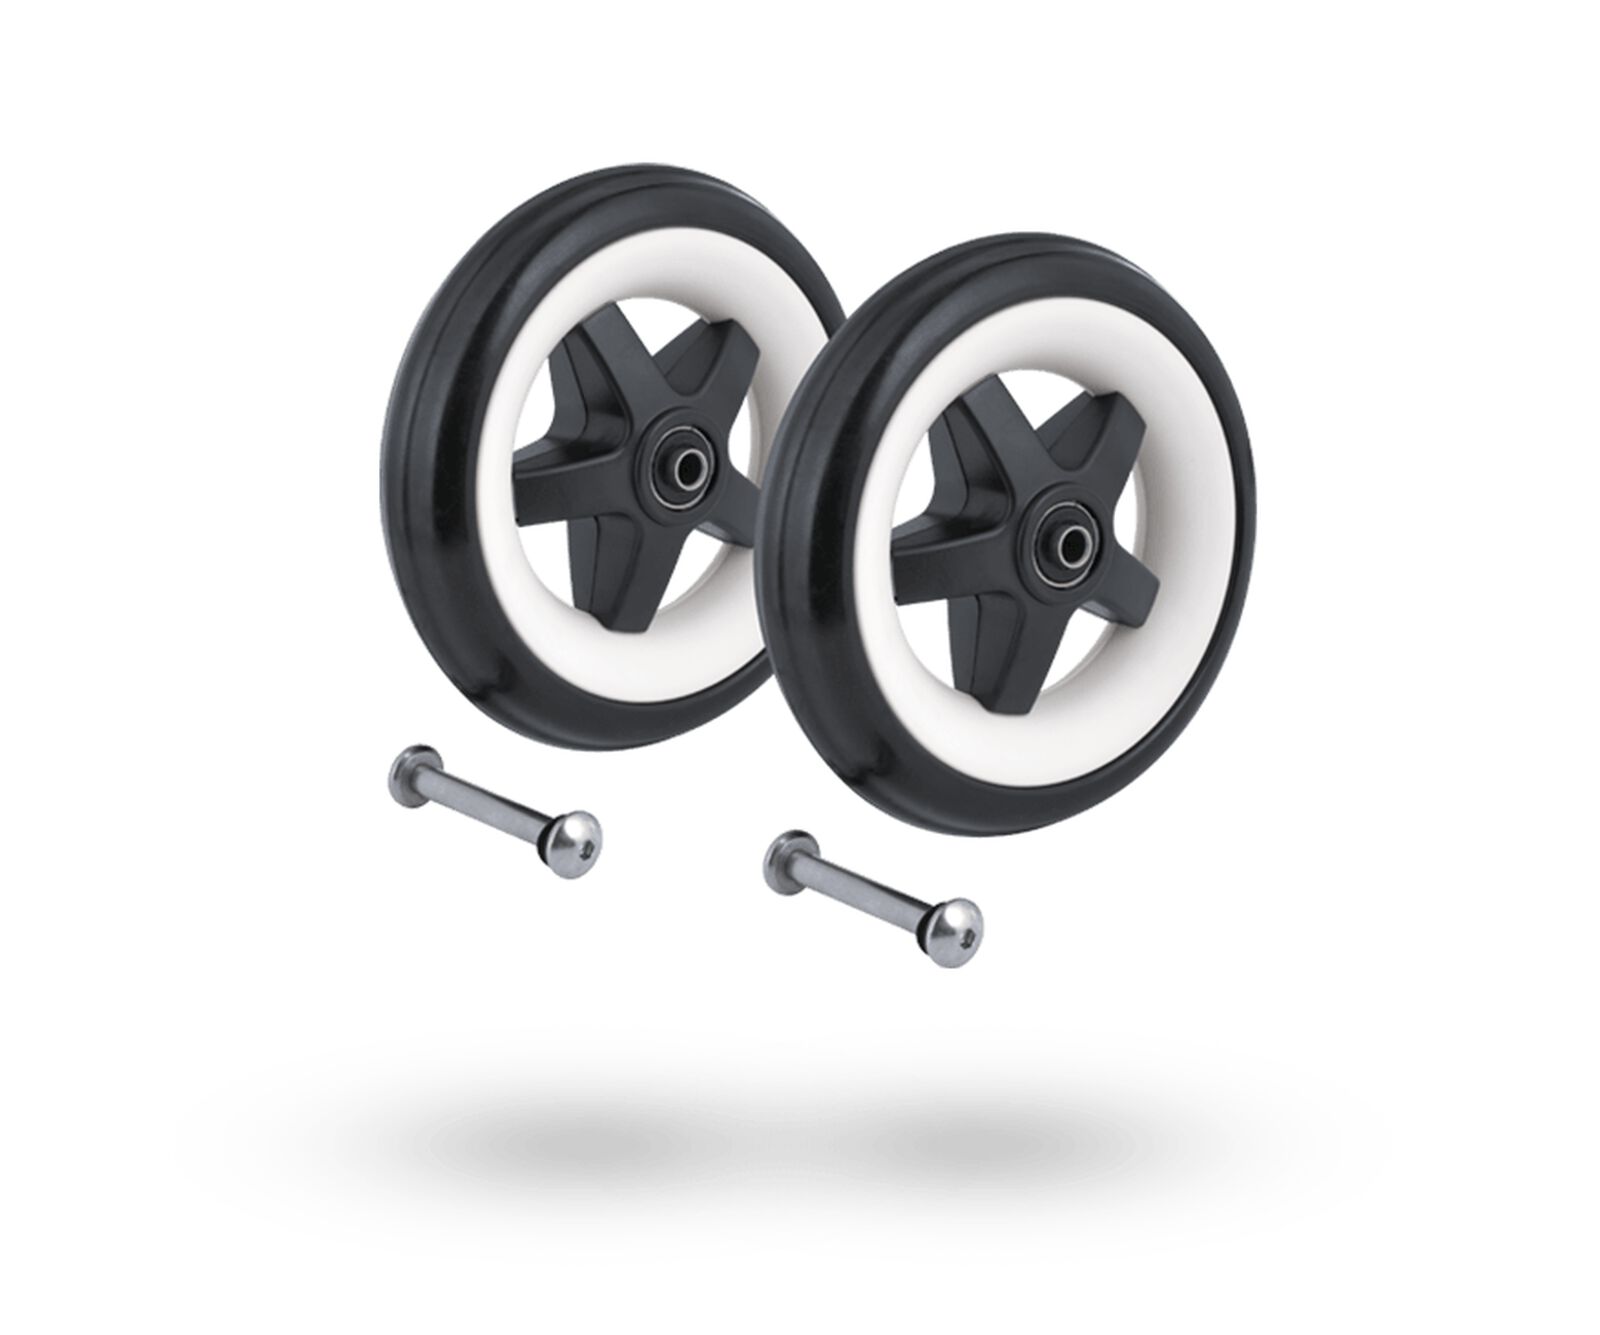 Bugaboo Bee (2010 model) rear wheels replacement set - View 1